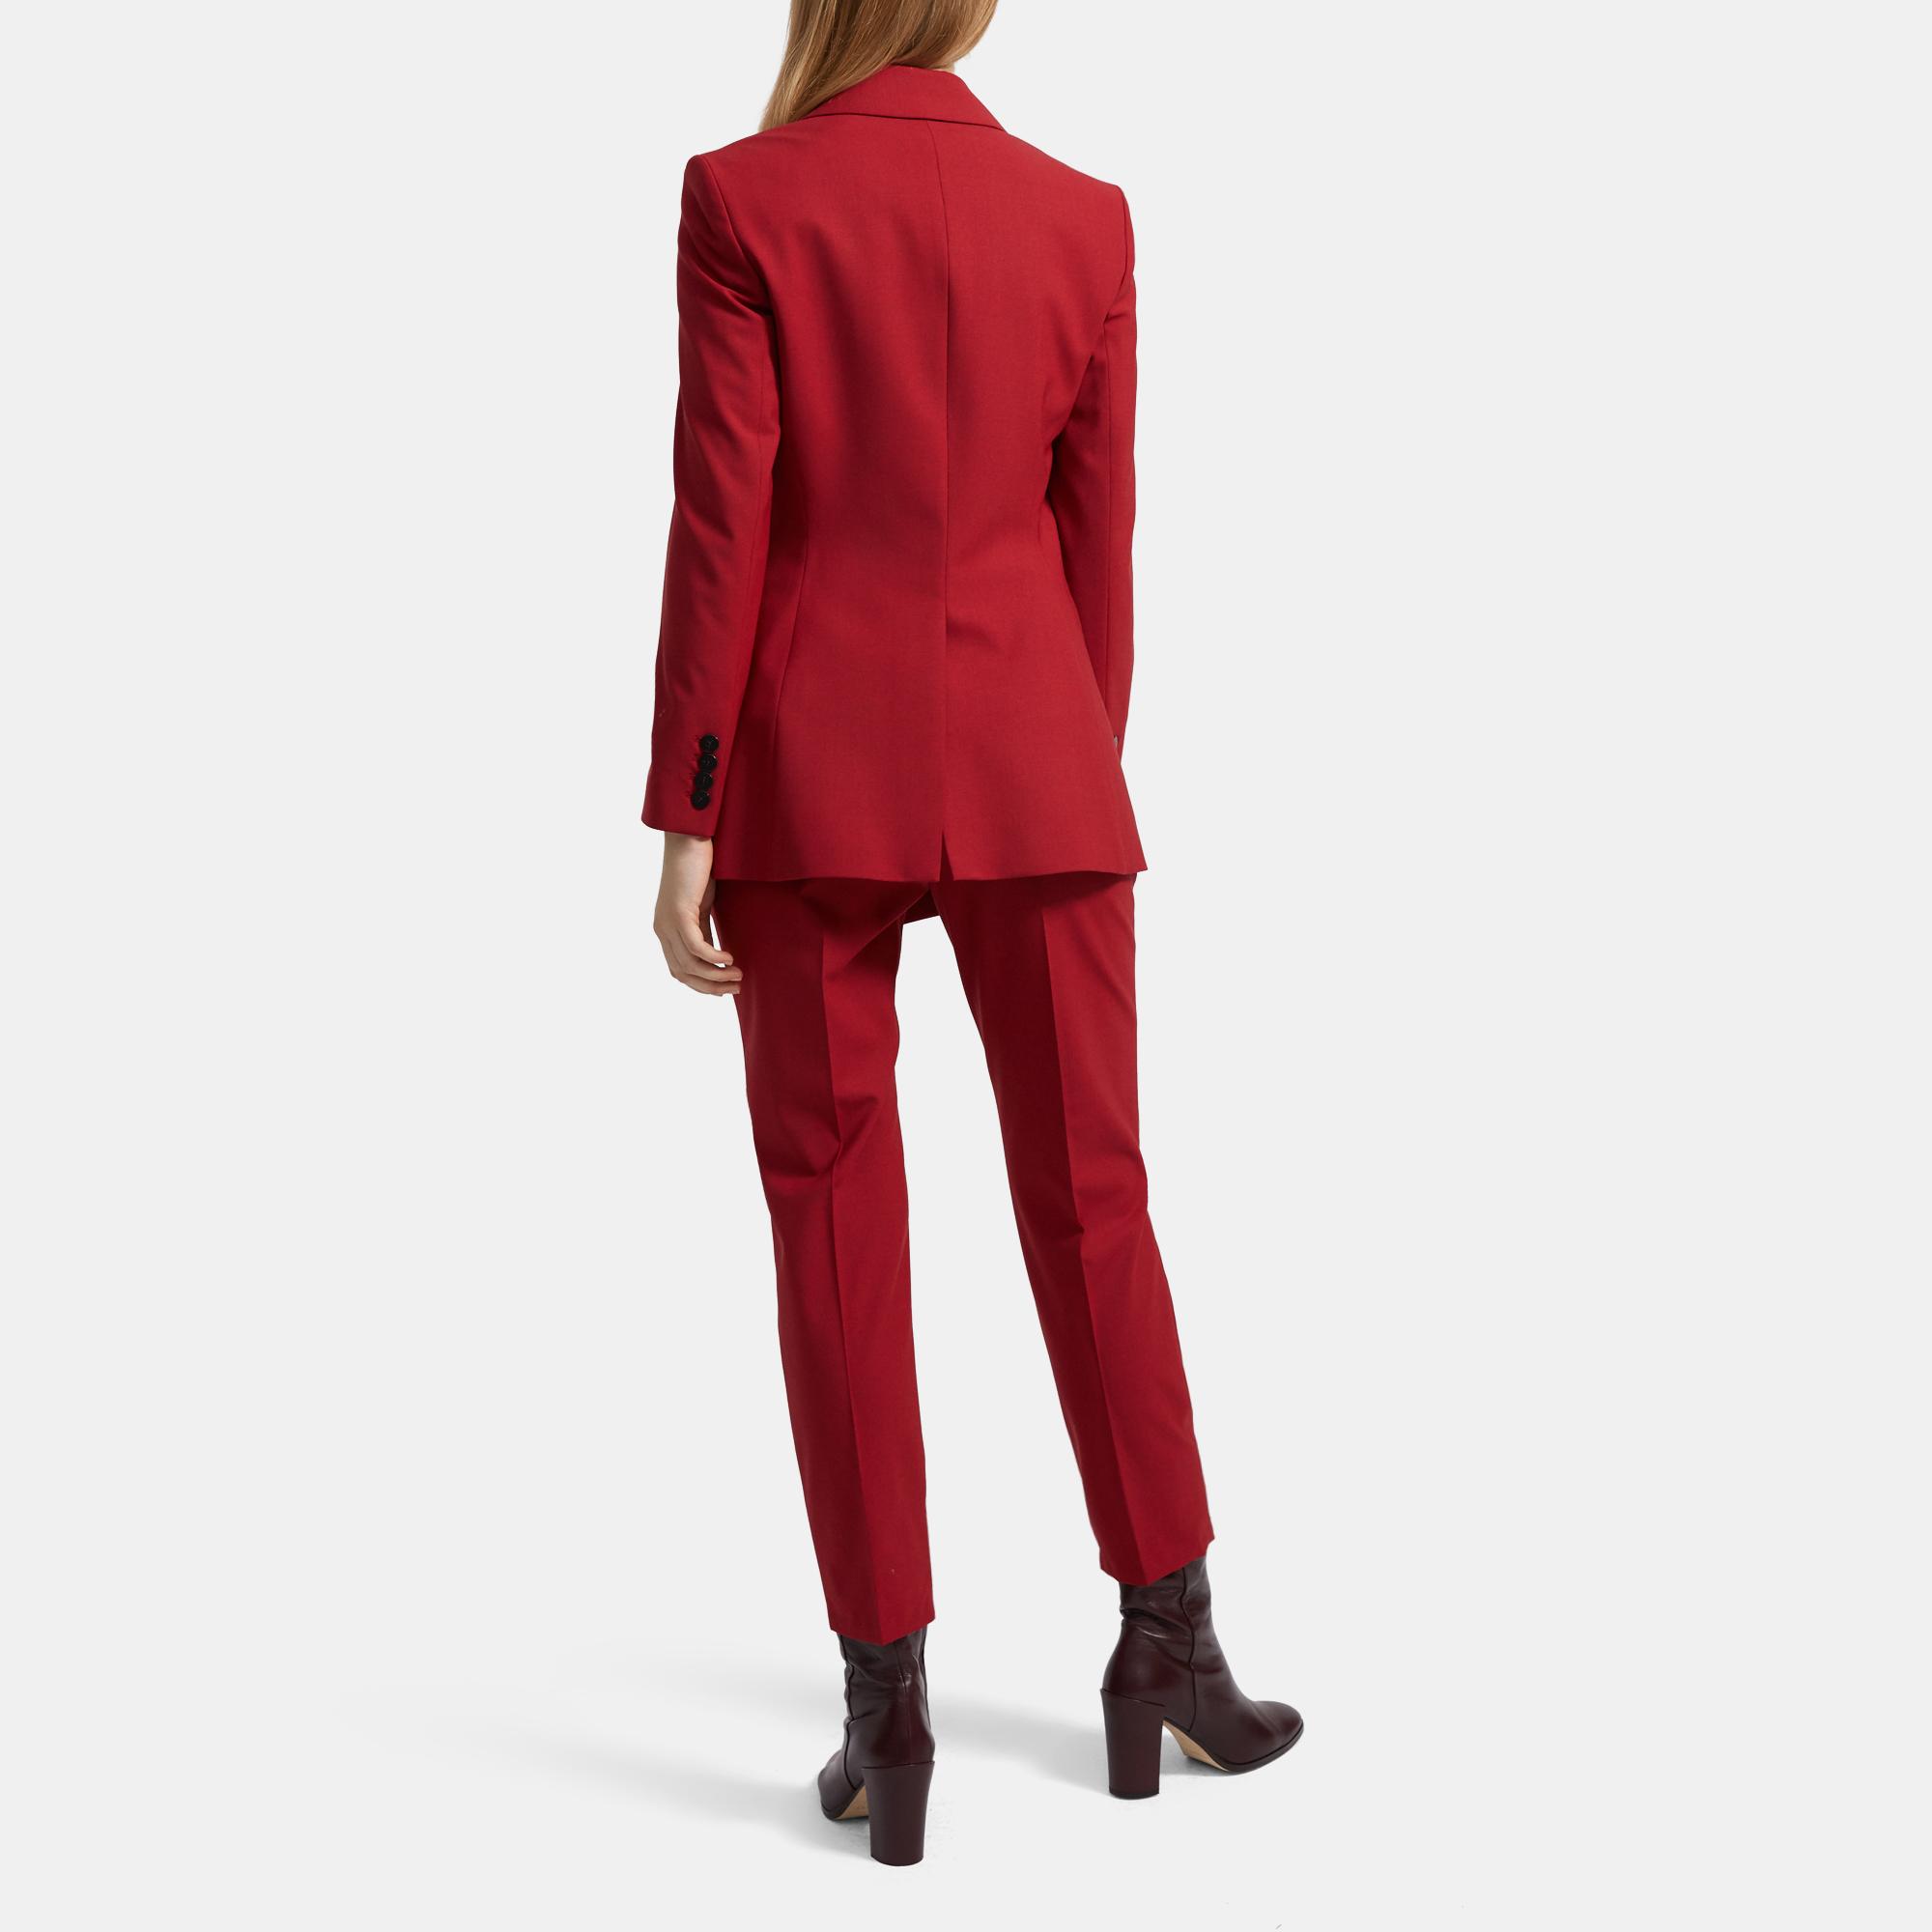 theory red suit